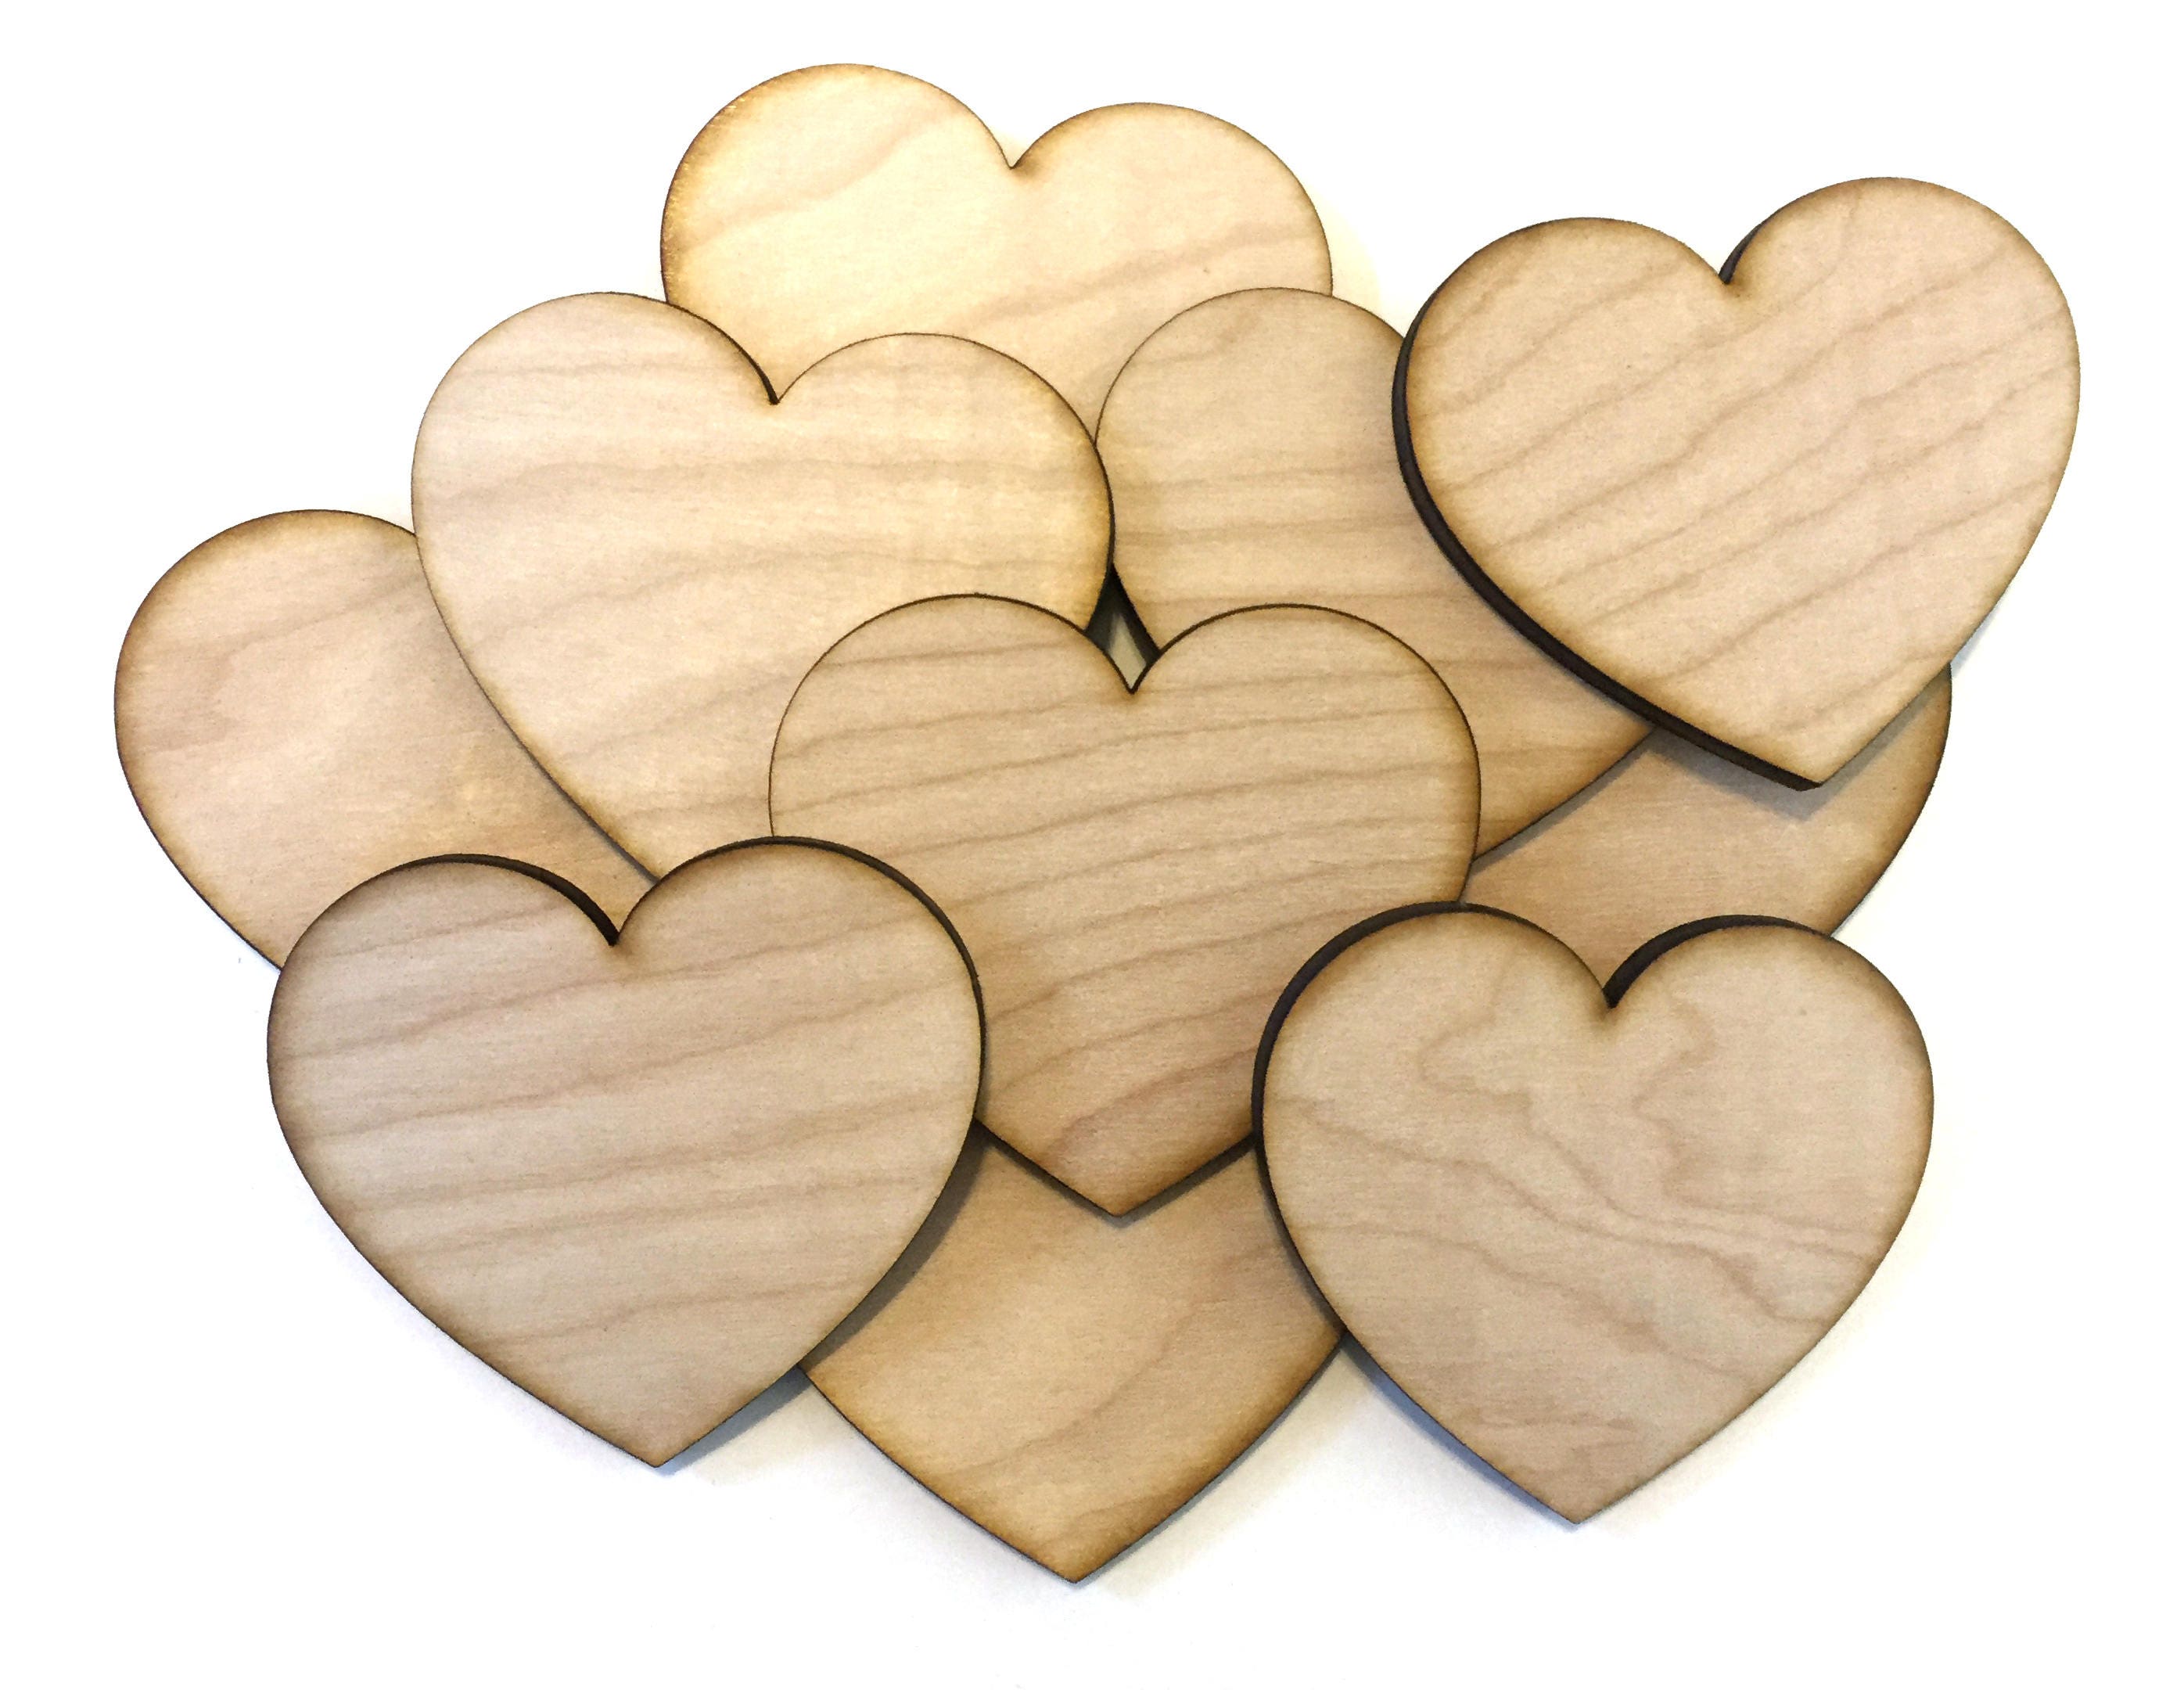 12 Unfinished Wood Cutouts - 3.5 Heart - Ready to Paint! Great